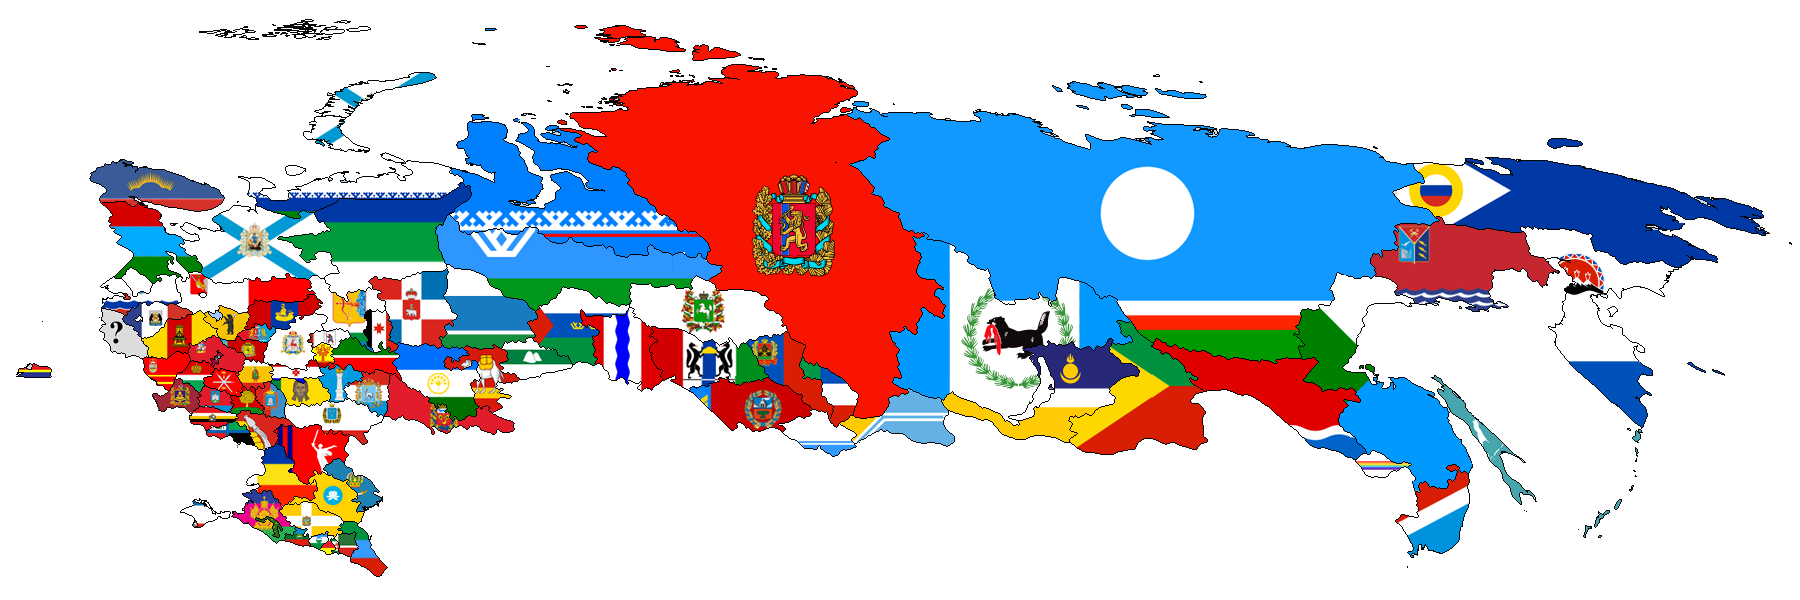 Russian Federation Flags